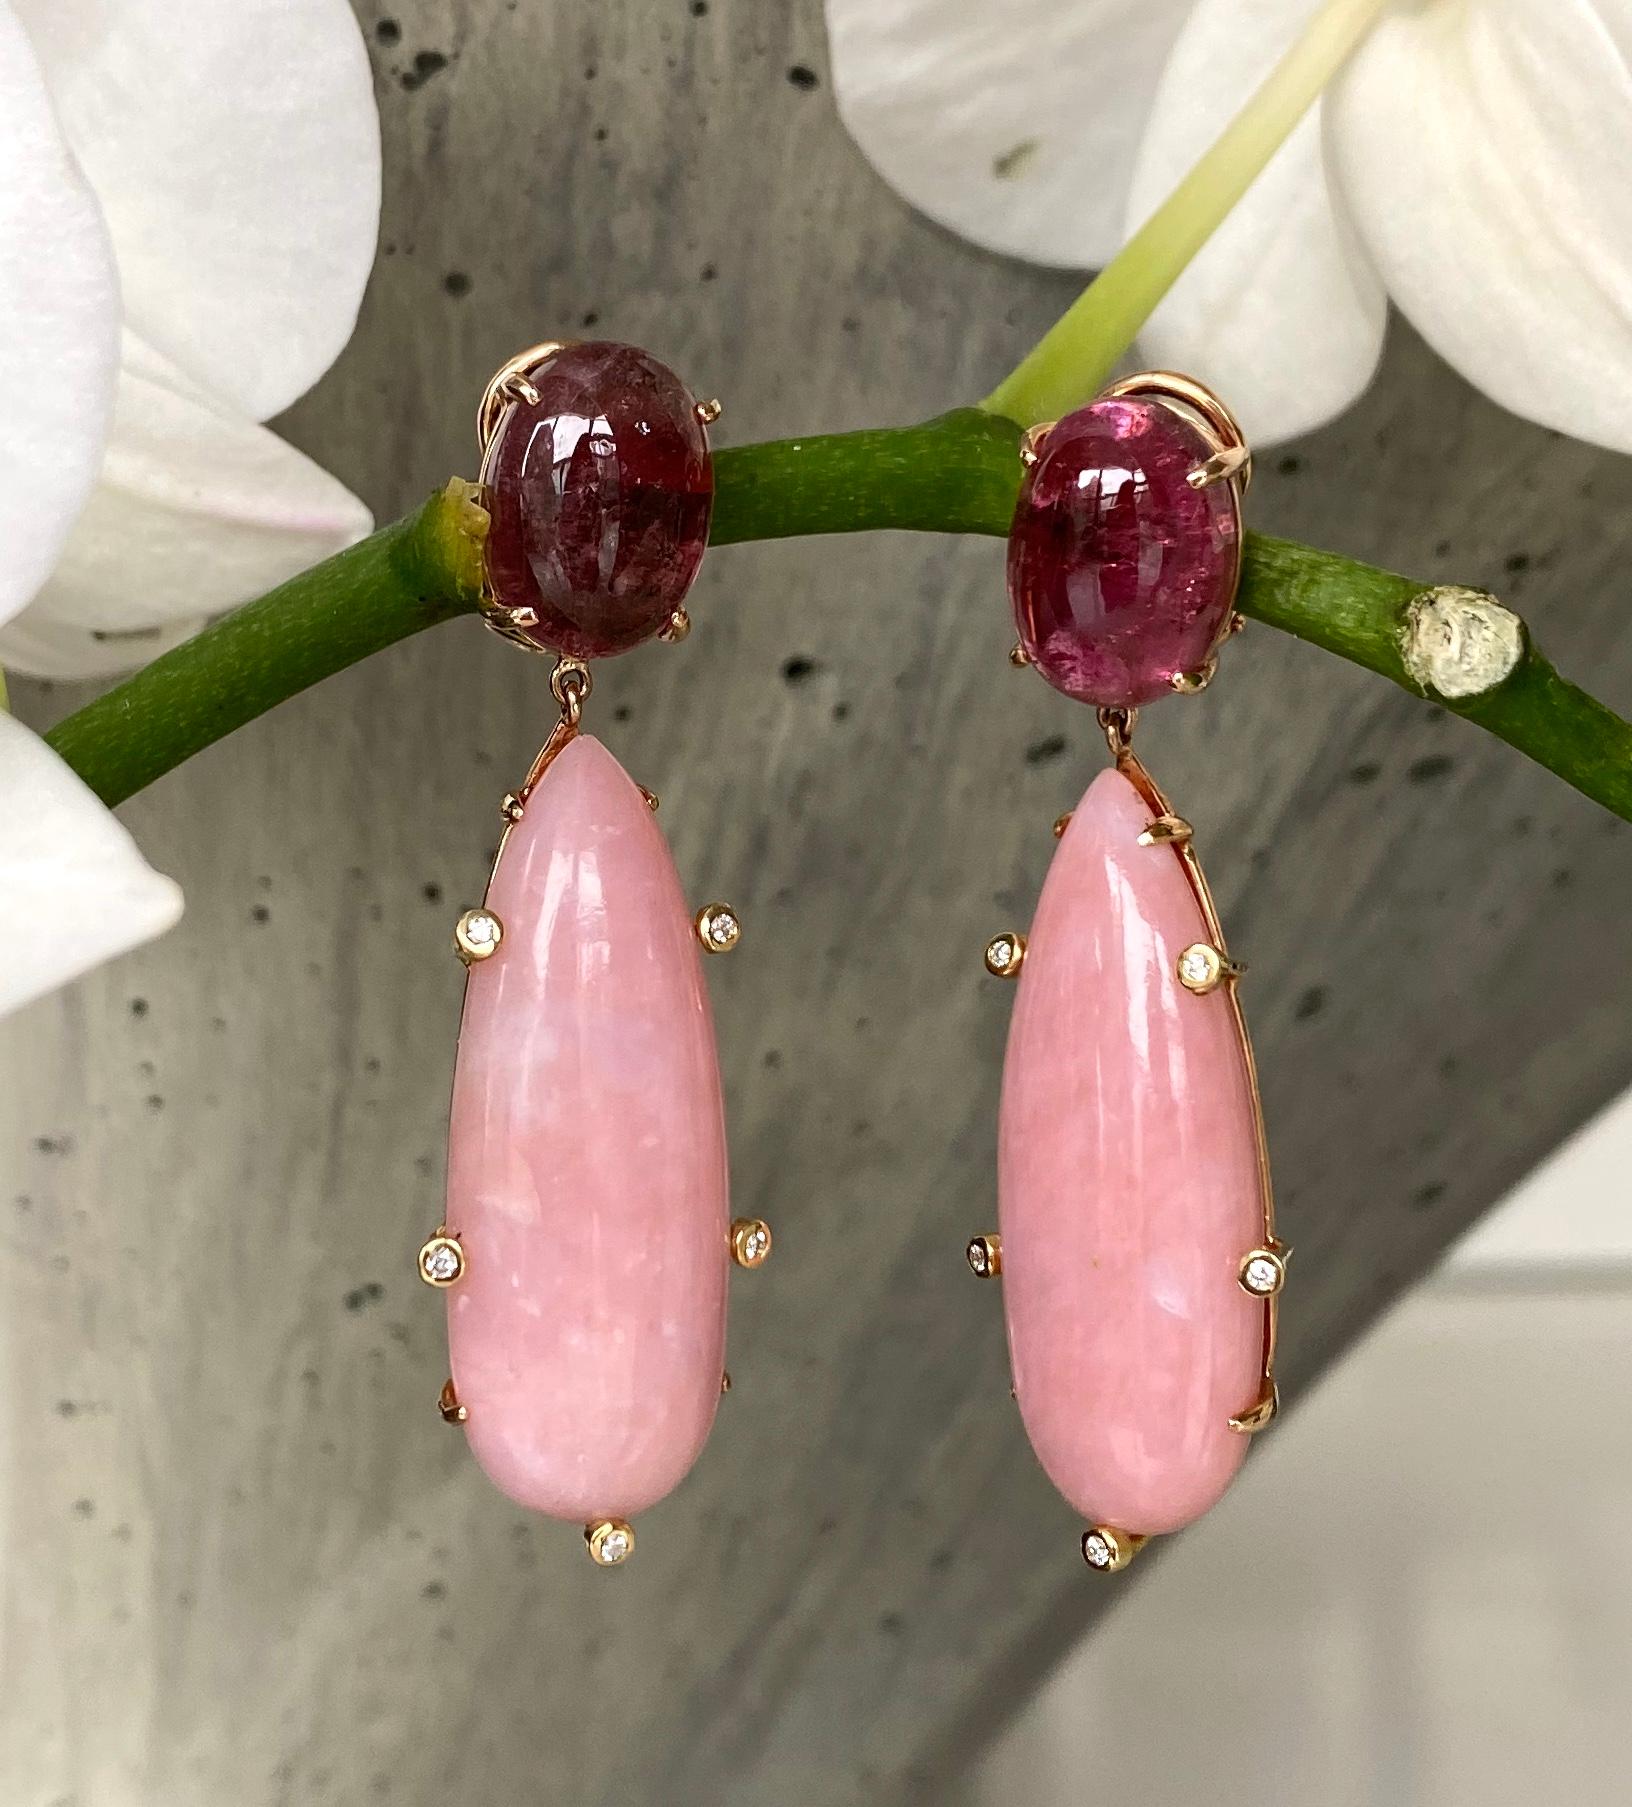 Dangle earrings of cabochon pink tourmalines and pink opal elongated drops accented with diamonds, handcrafted in 18 karat rose gold.

These lovely one-of-a-kind earrings feature luminous oval cabochon pink tourmalines and long teardrop shaped pink